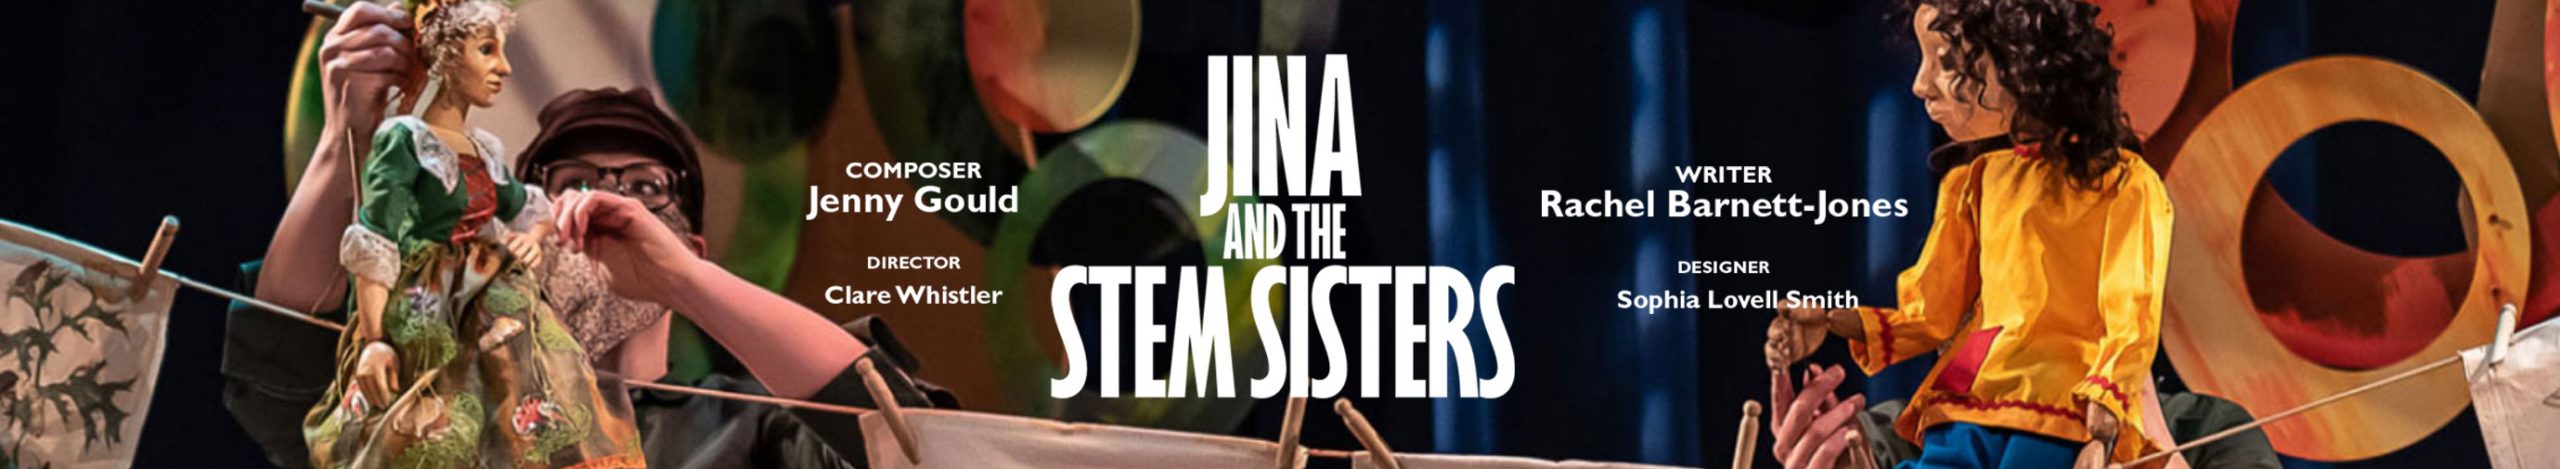 Jina and the STEM Sisters